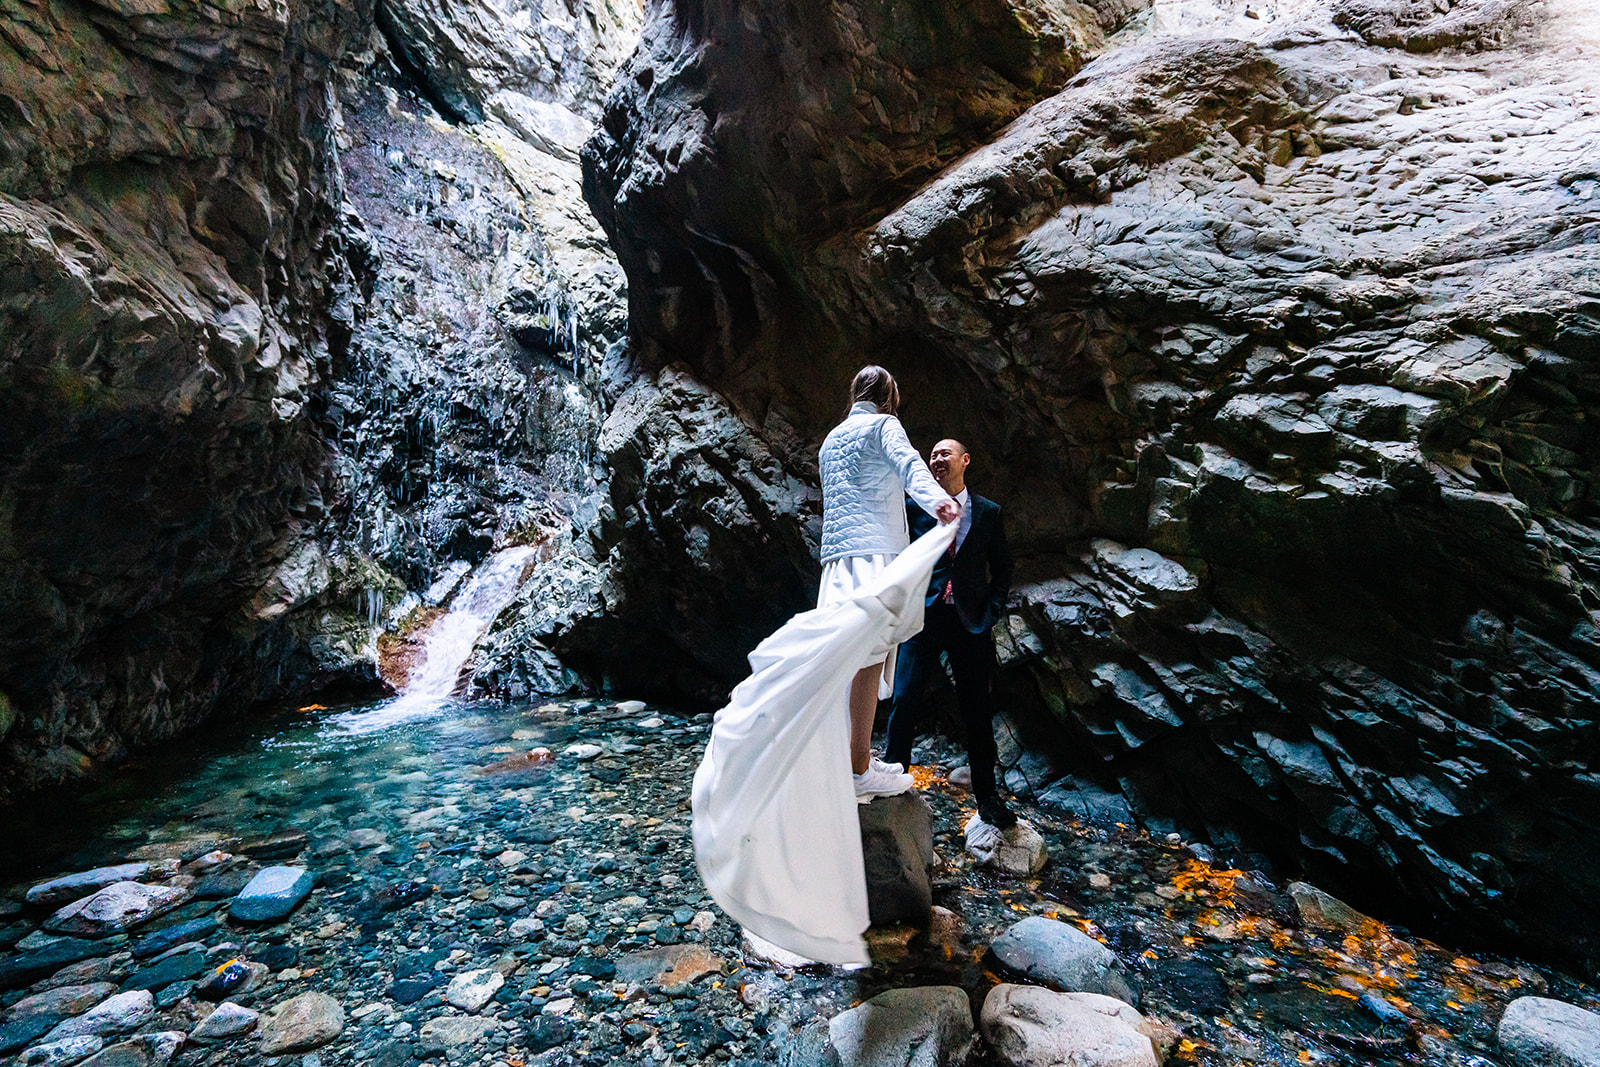 A bride and groom standing next to a waterfall in a canyon.